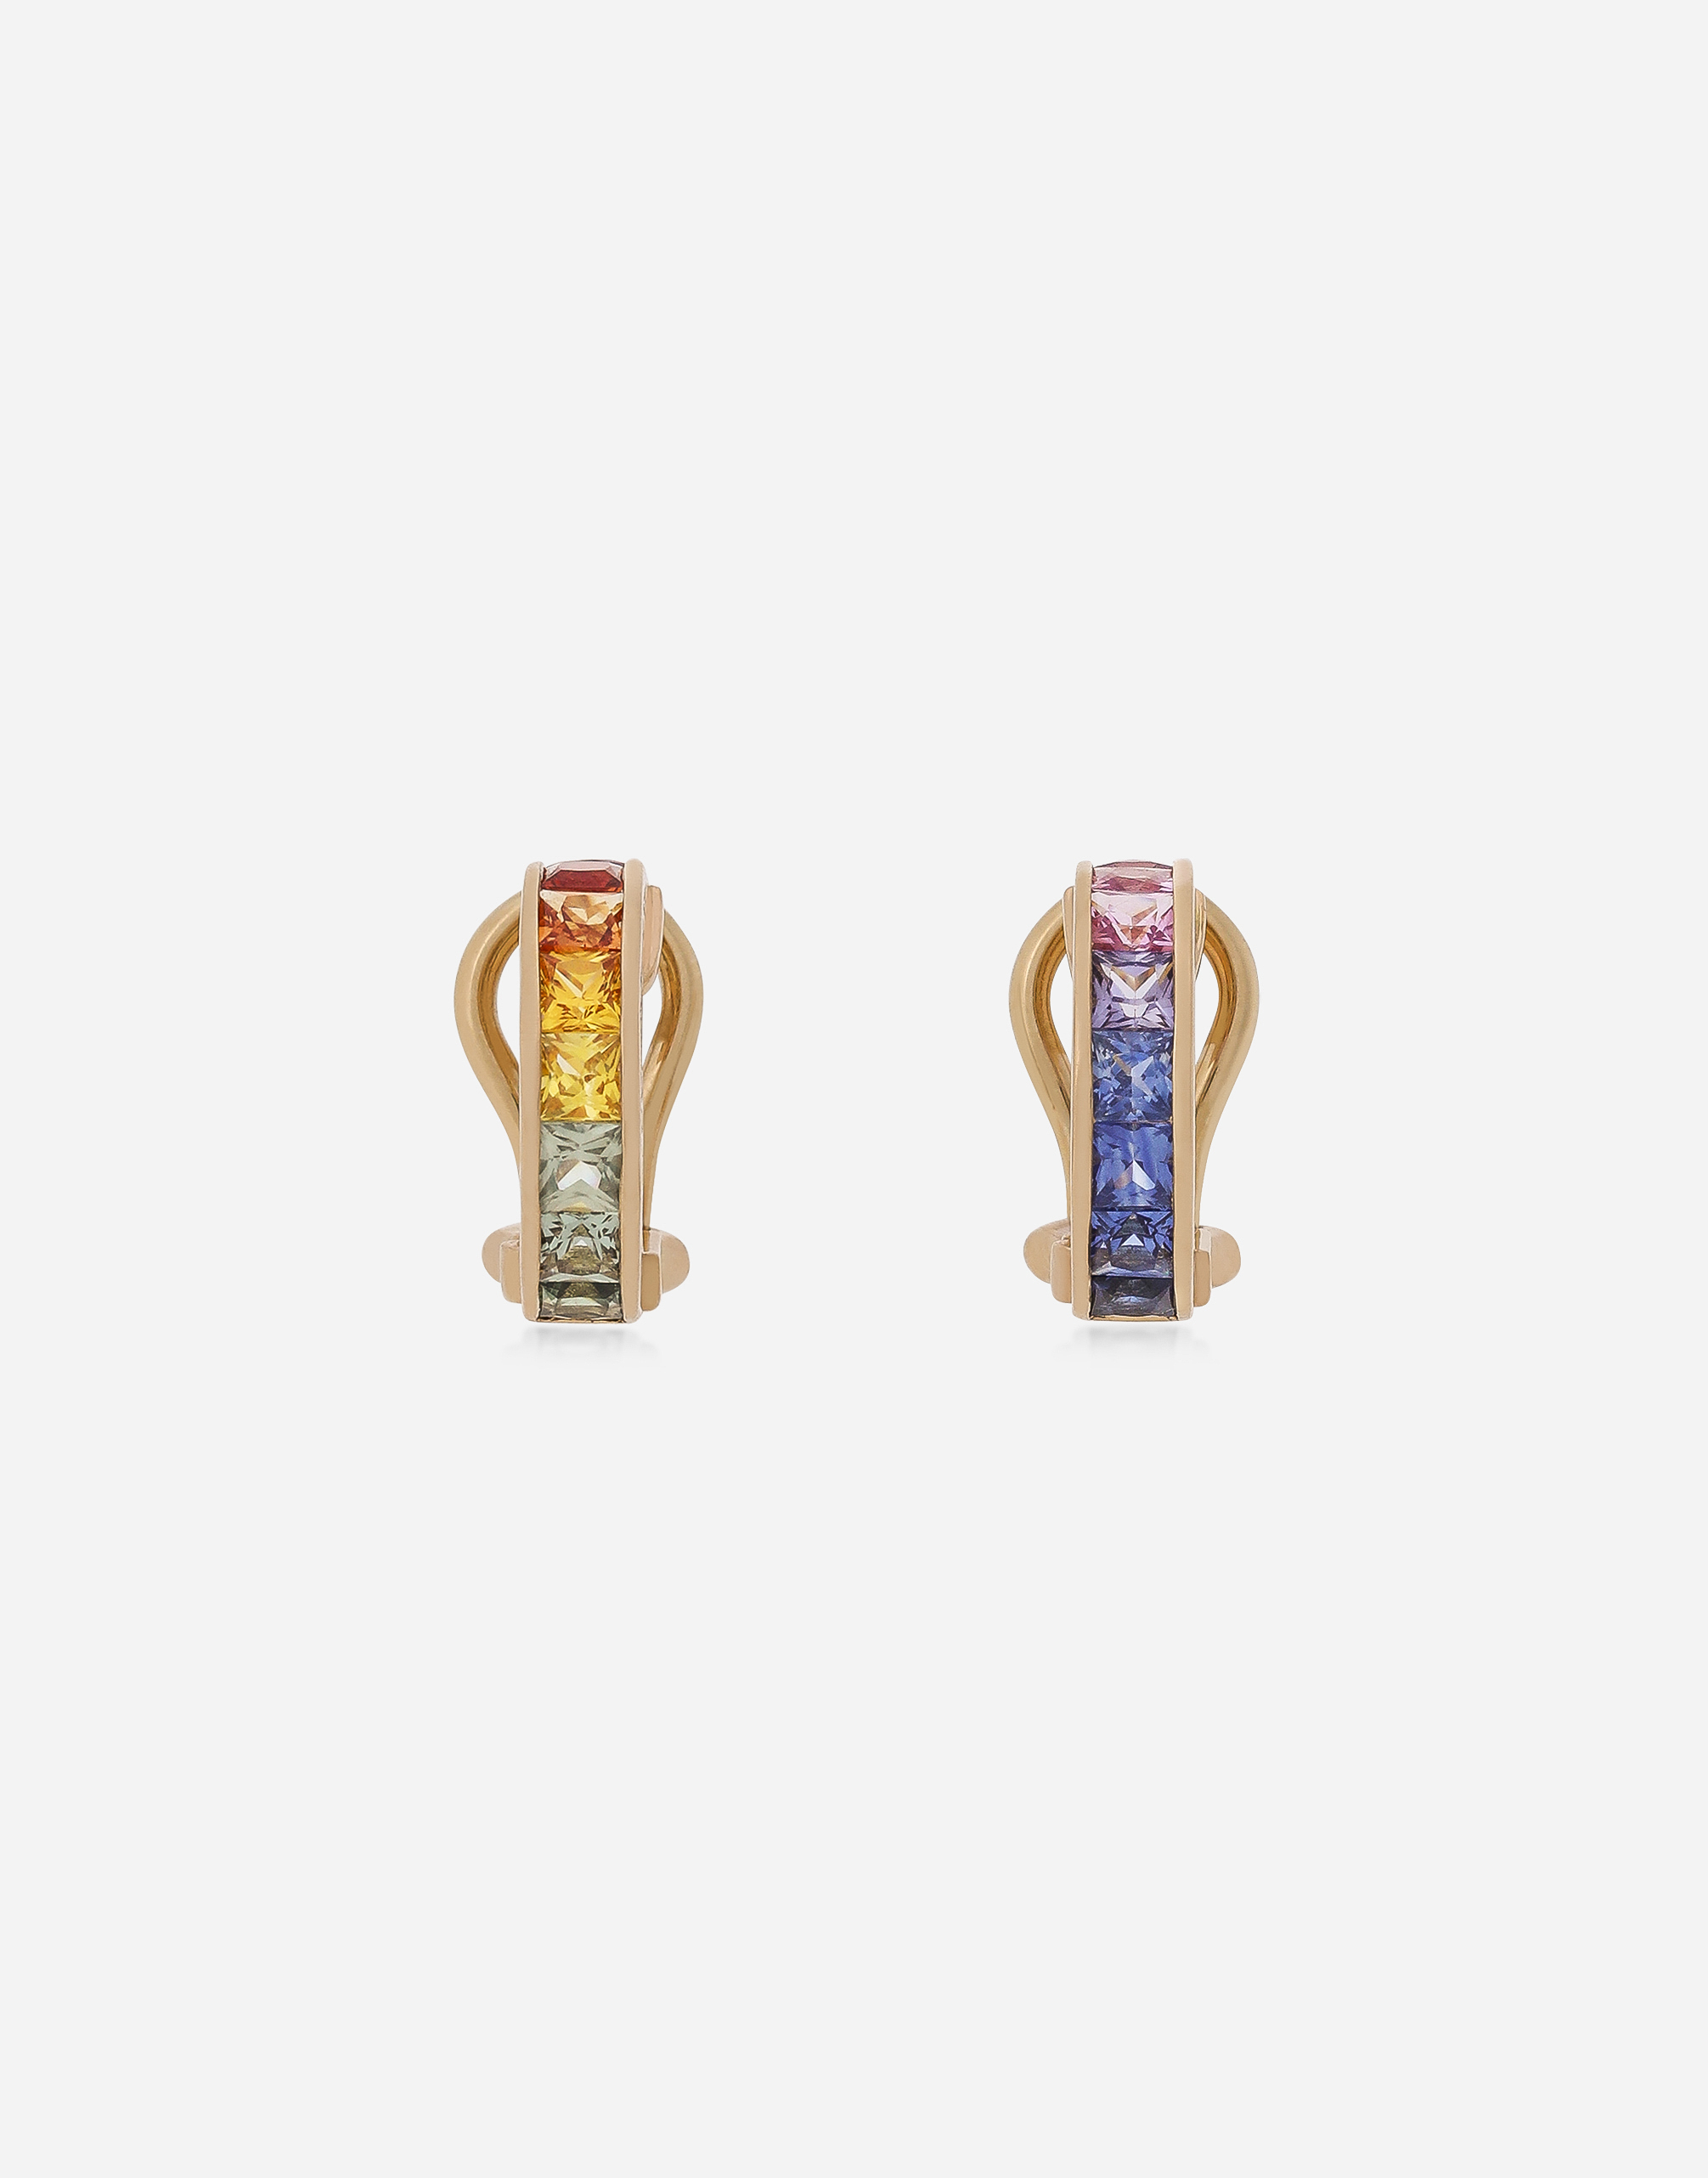 Dolce & Gabbana Rainbow Earrings In Yellow Gold 18kt With Multicolor Sapphires And Diamonds